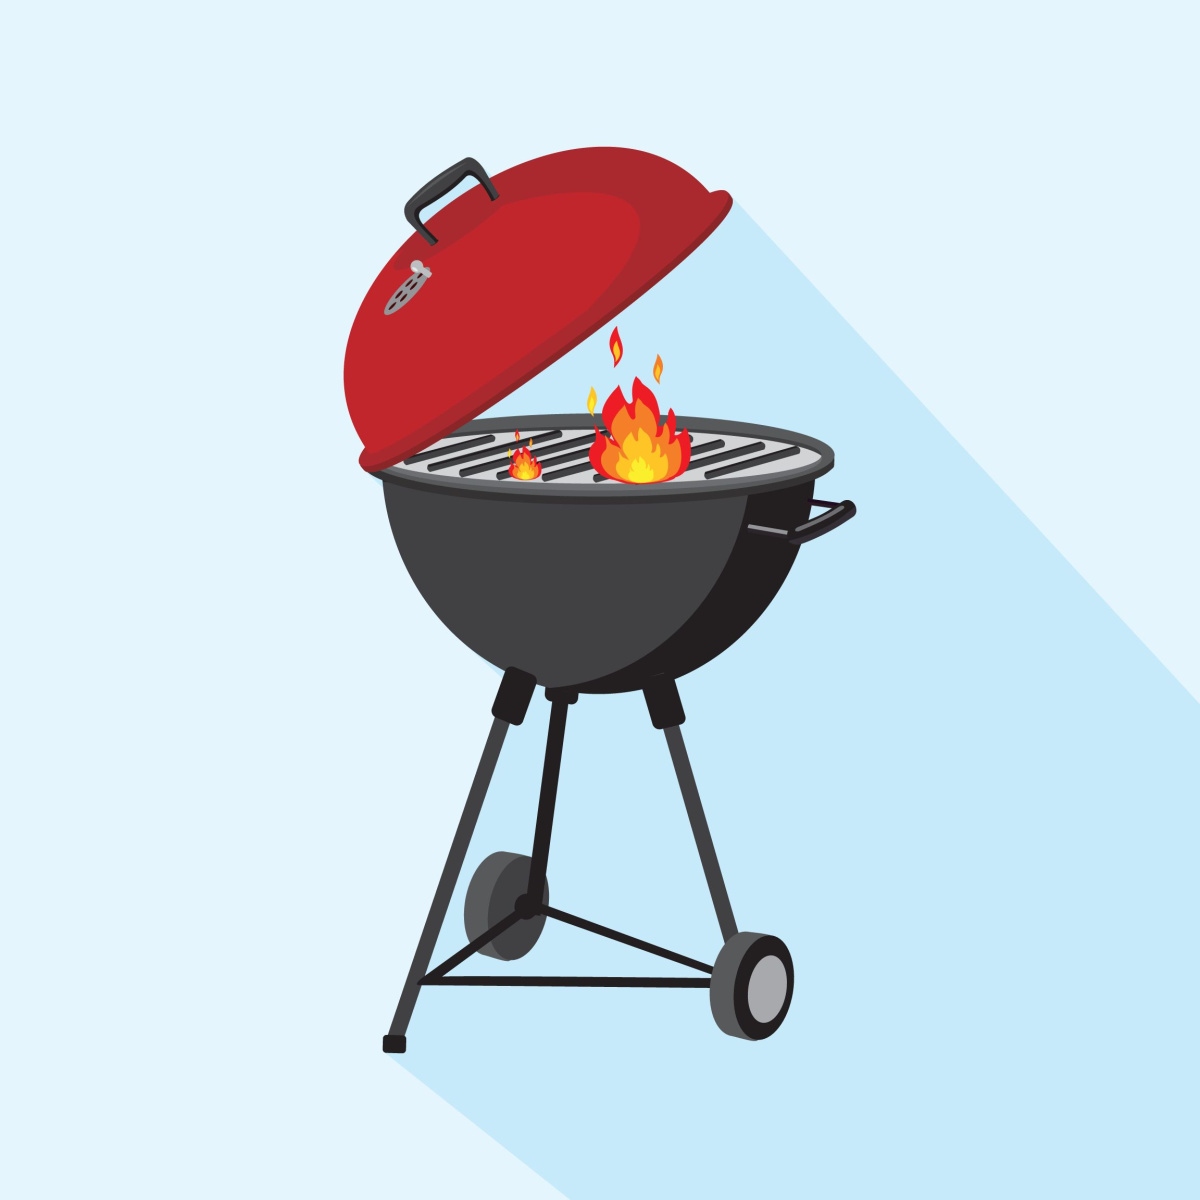 A bbq grill for labor day with flames visible out of the grill.